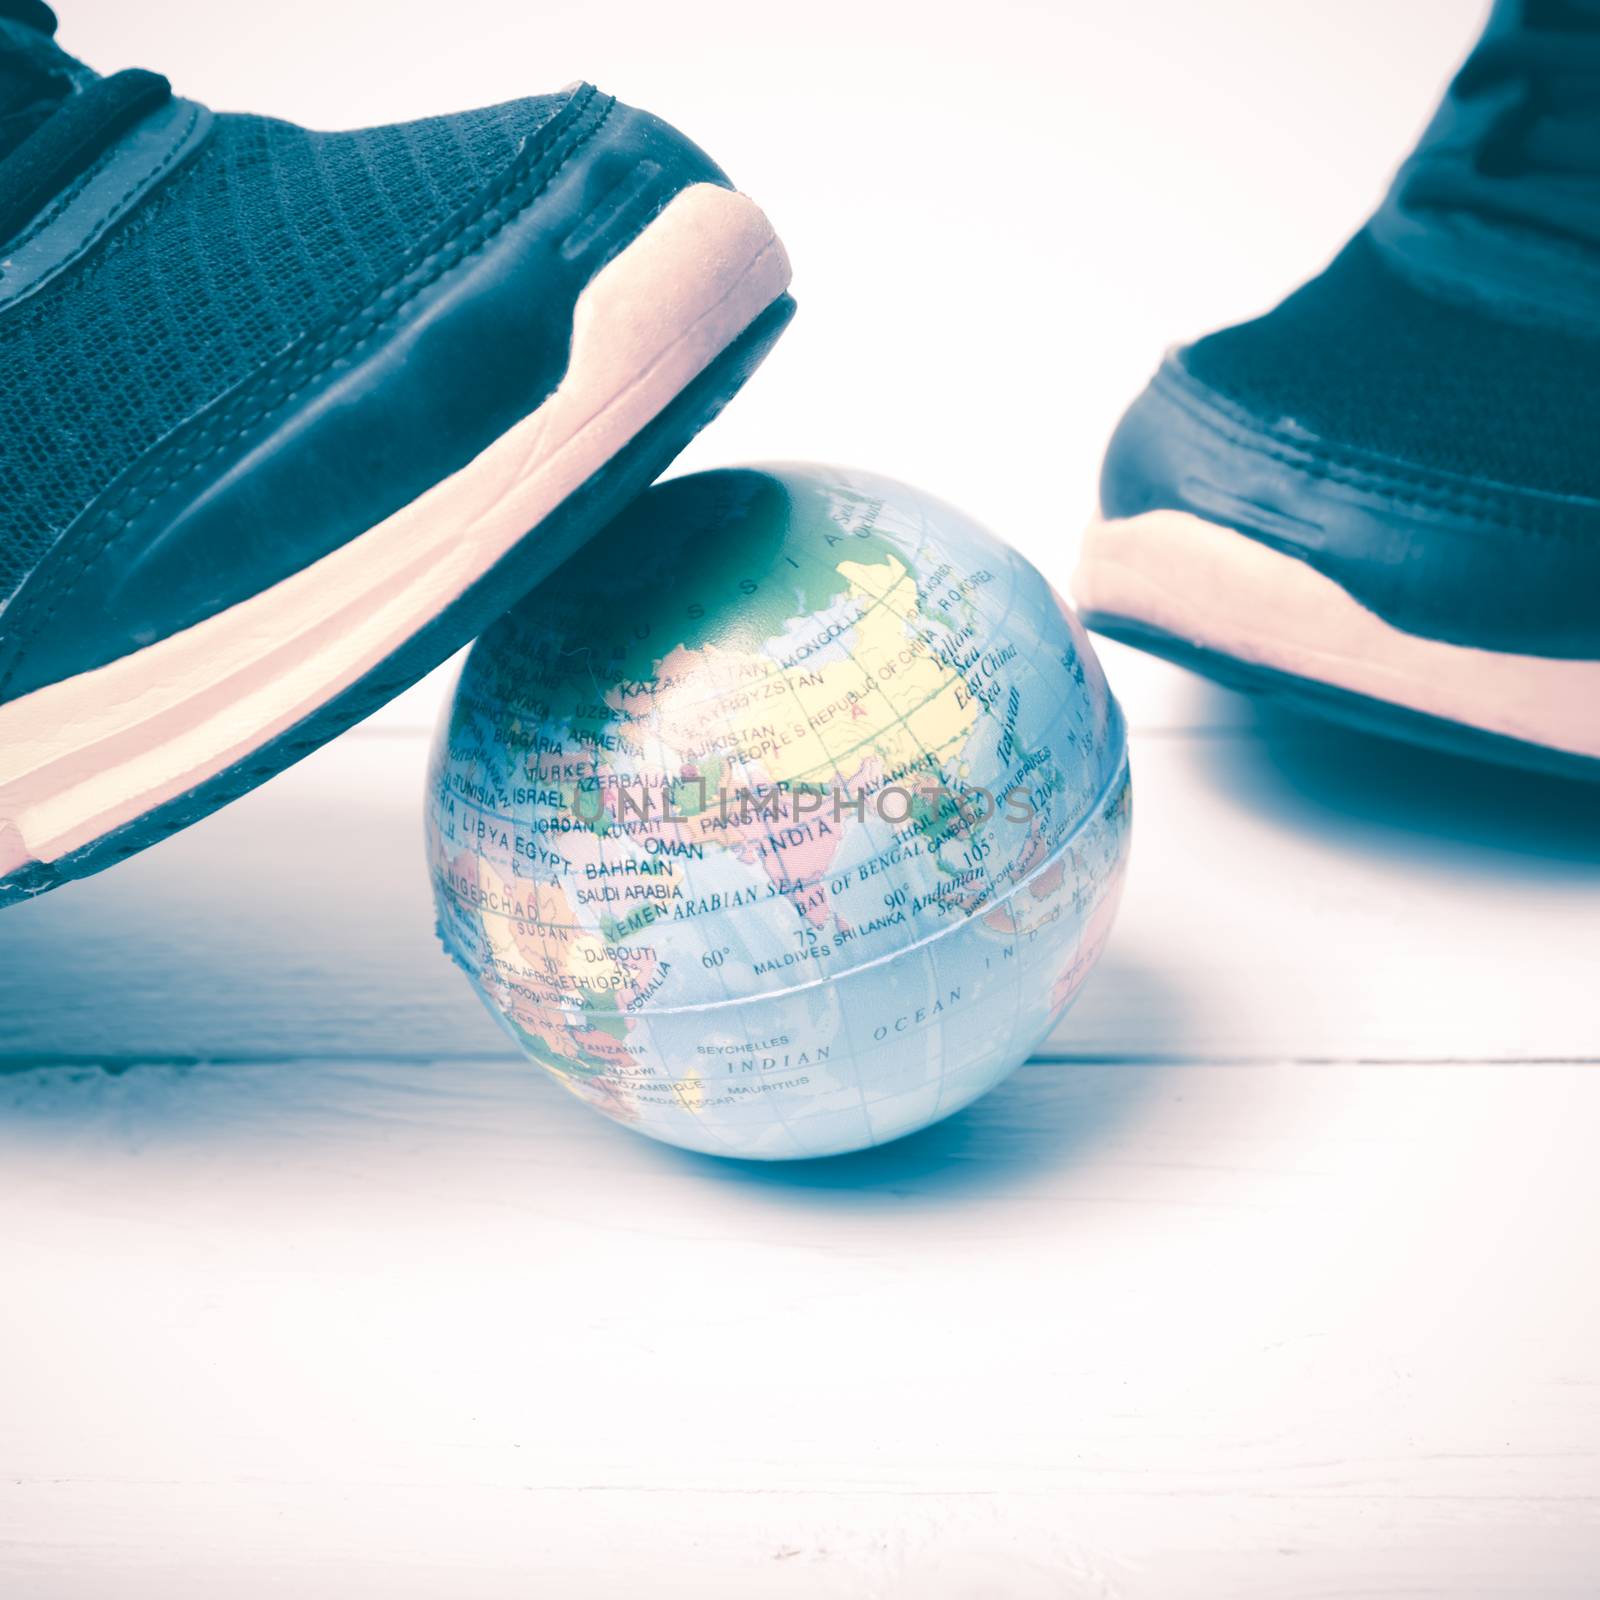 running shoes and earth ball on white wood table concept world healthy vintage style